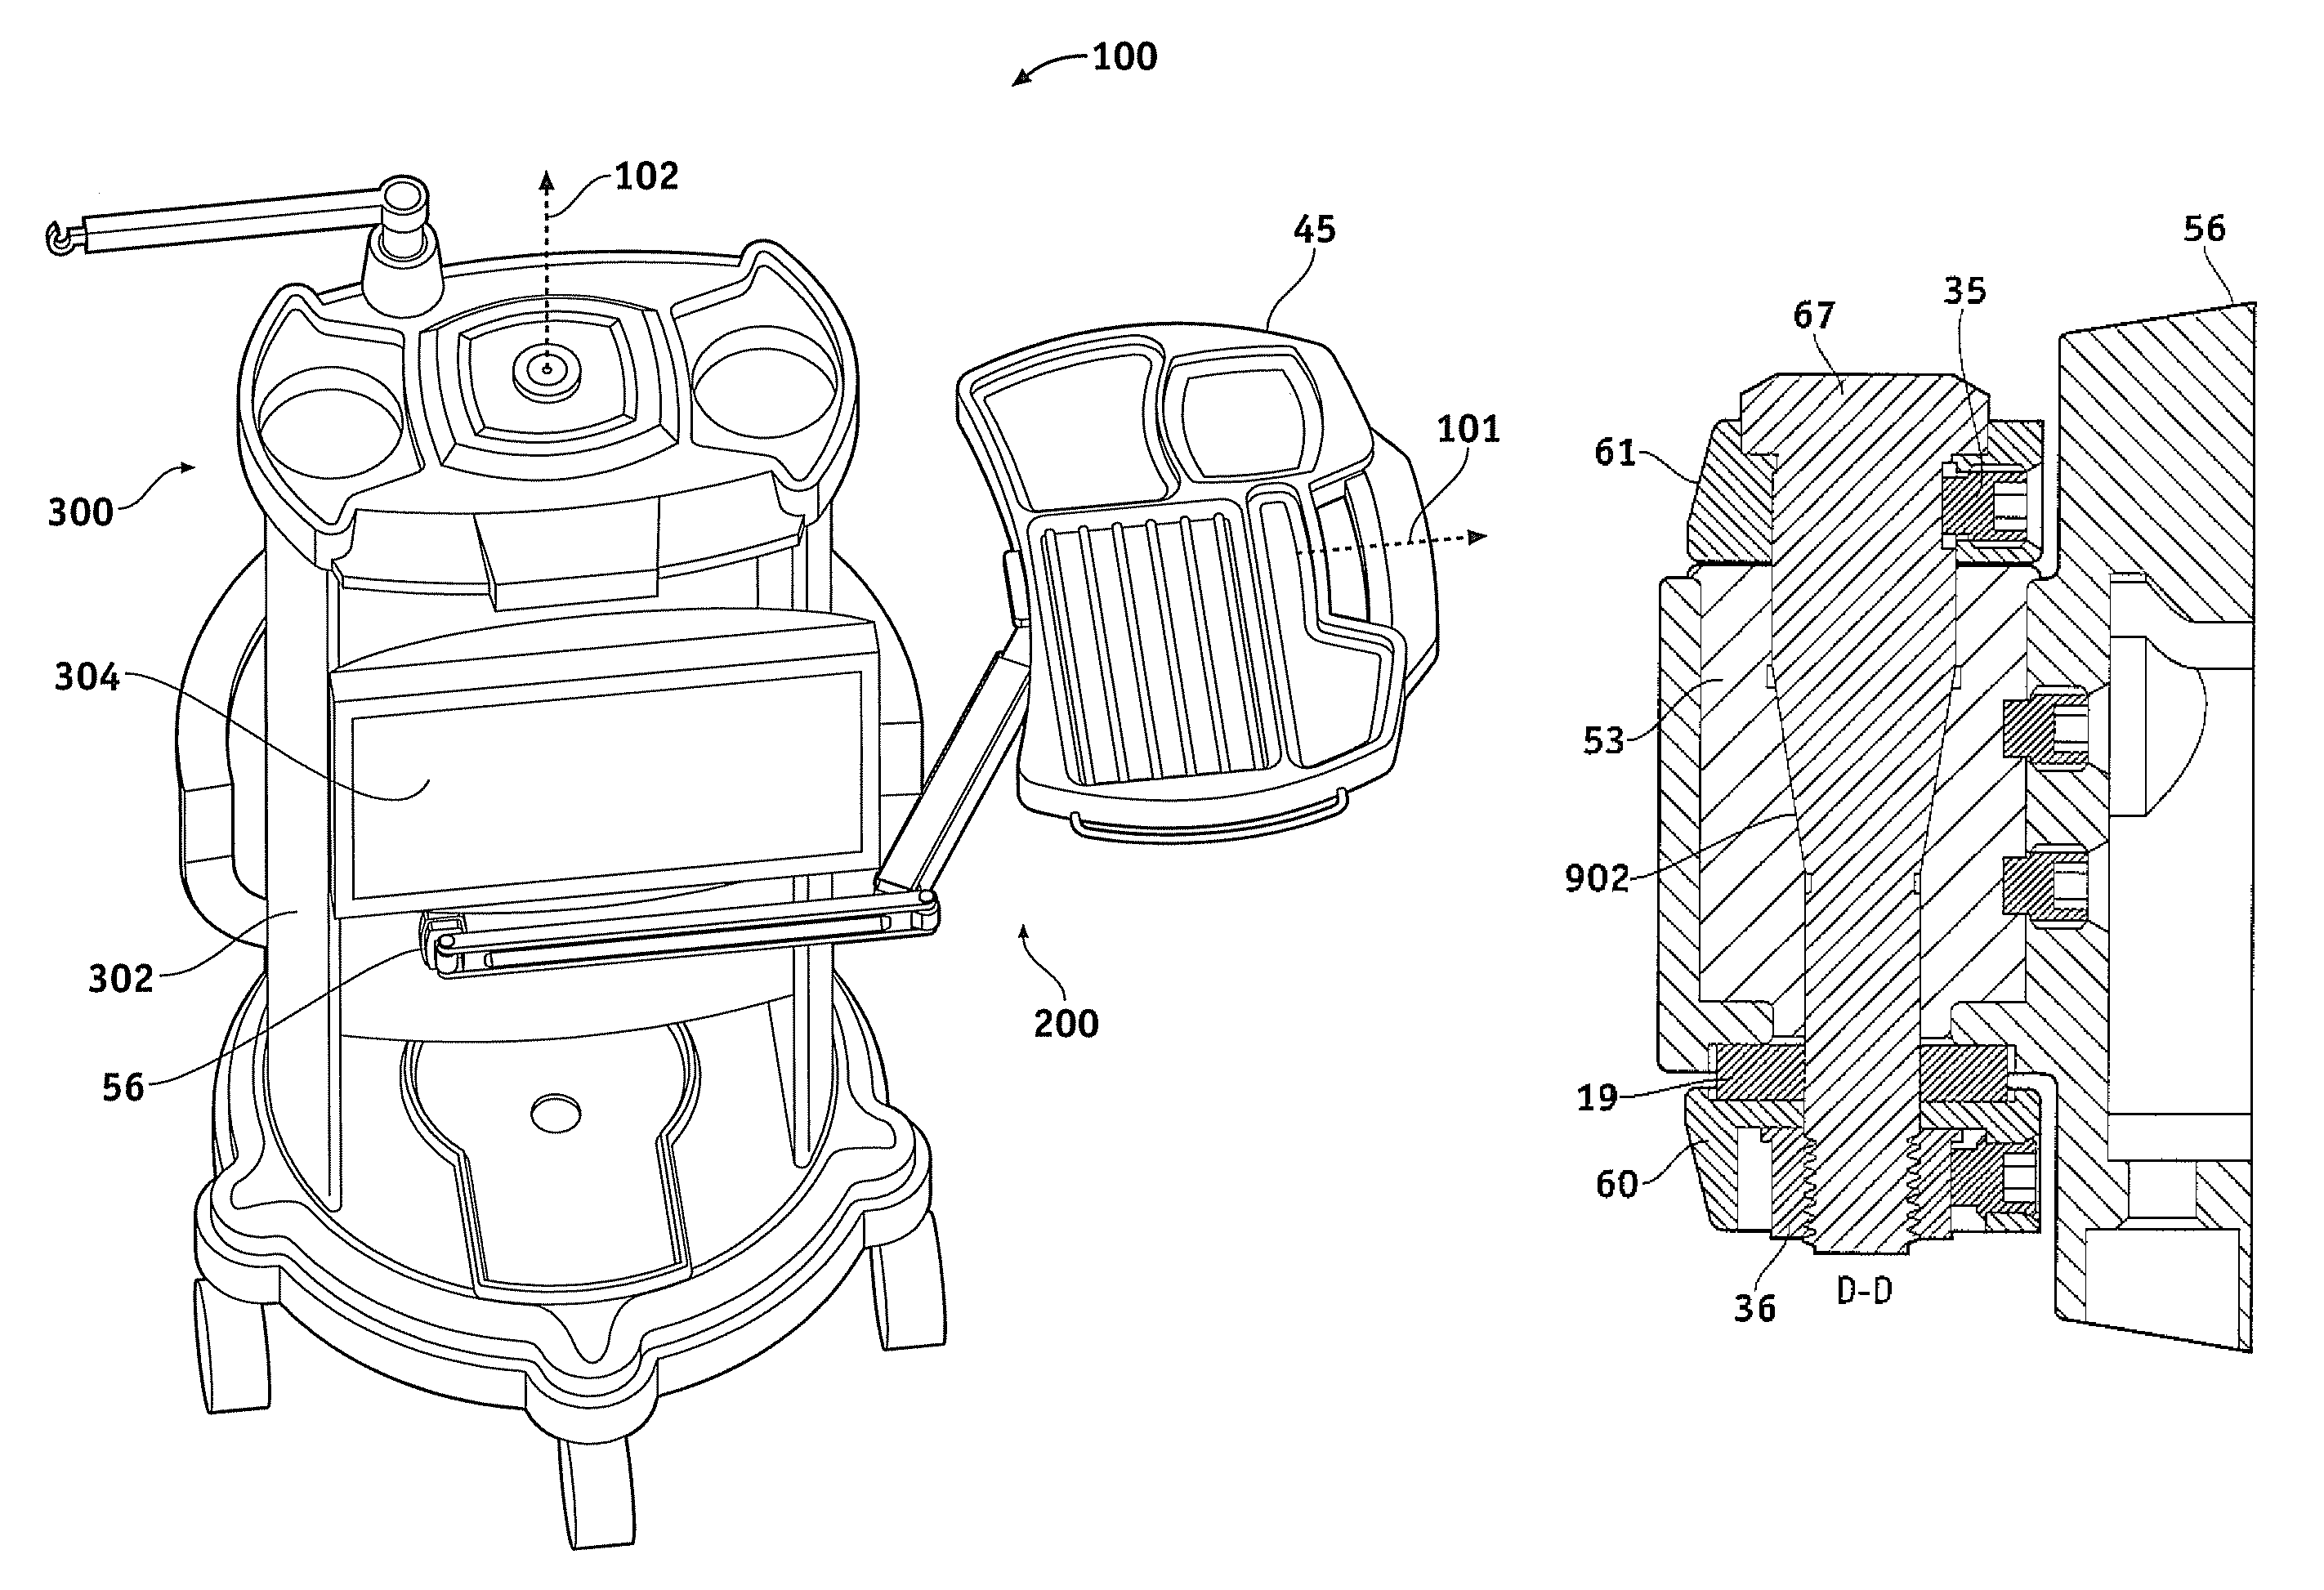 Surgical tray methods and apparatus